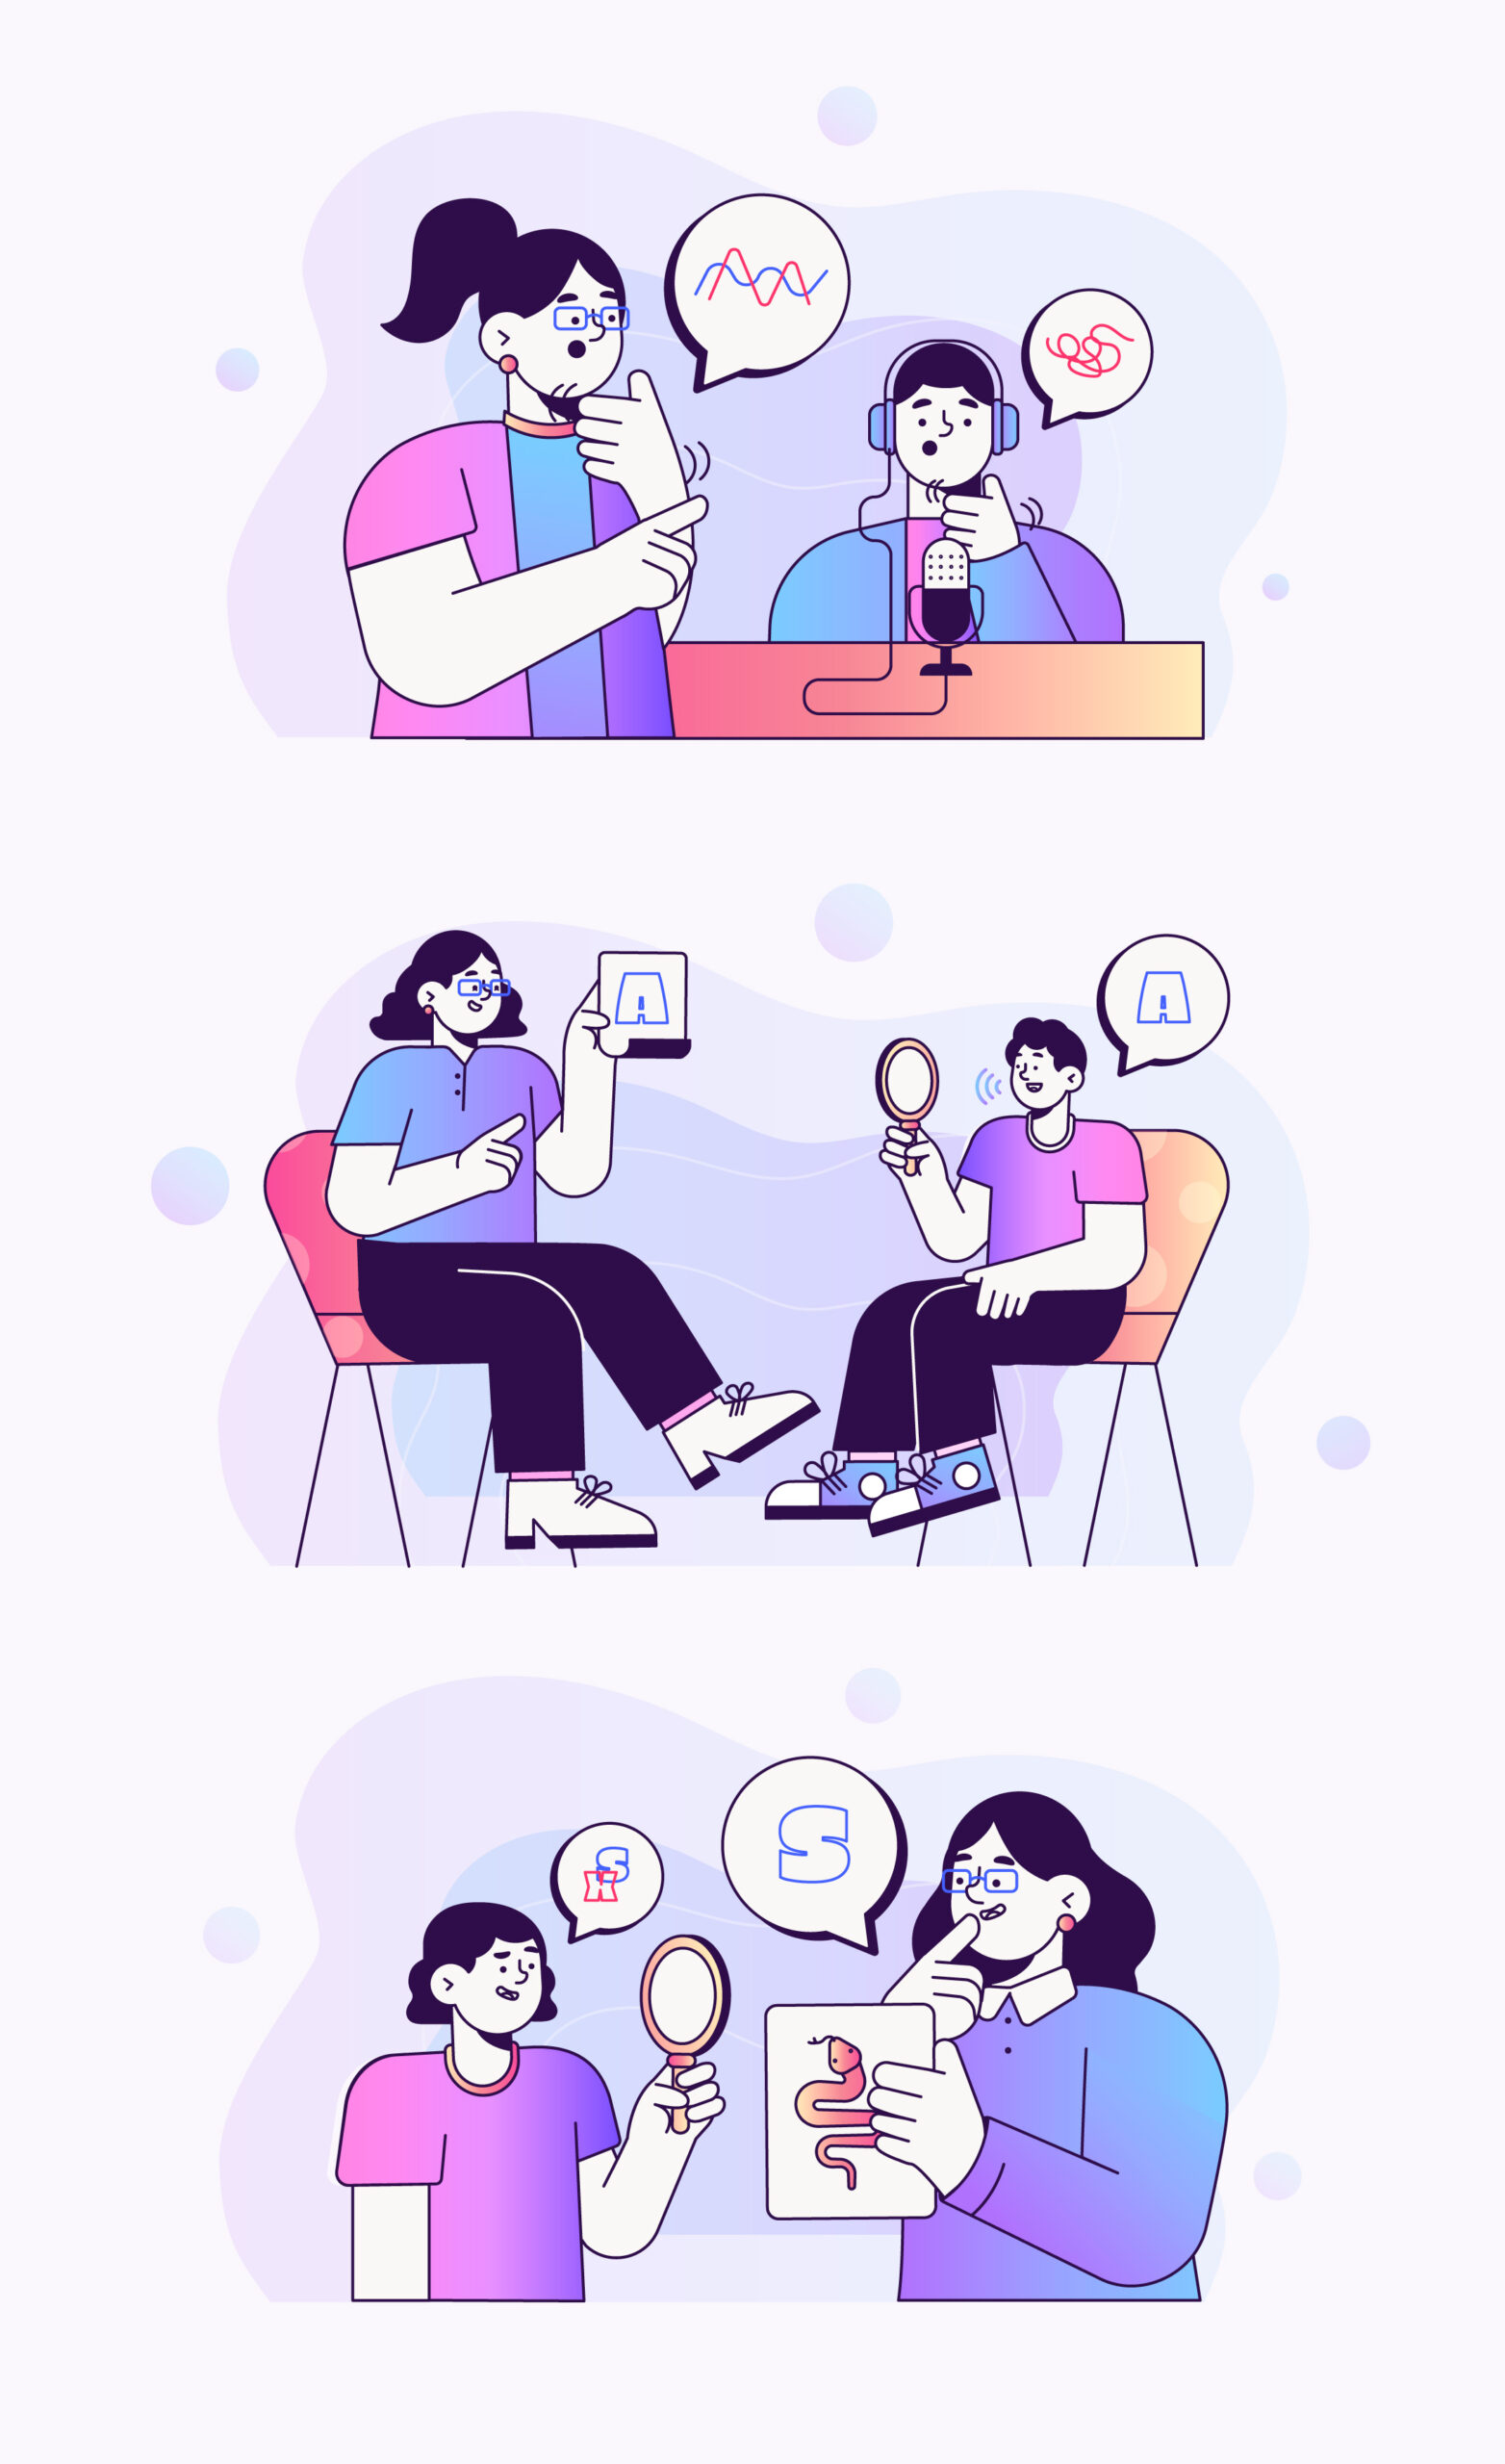 Speech therapy session (https://www.freepik.com/free-vector/gradient-speech-therapy-scenes-collection_21075470.htm)